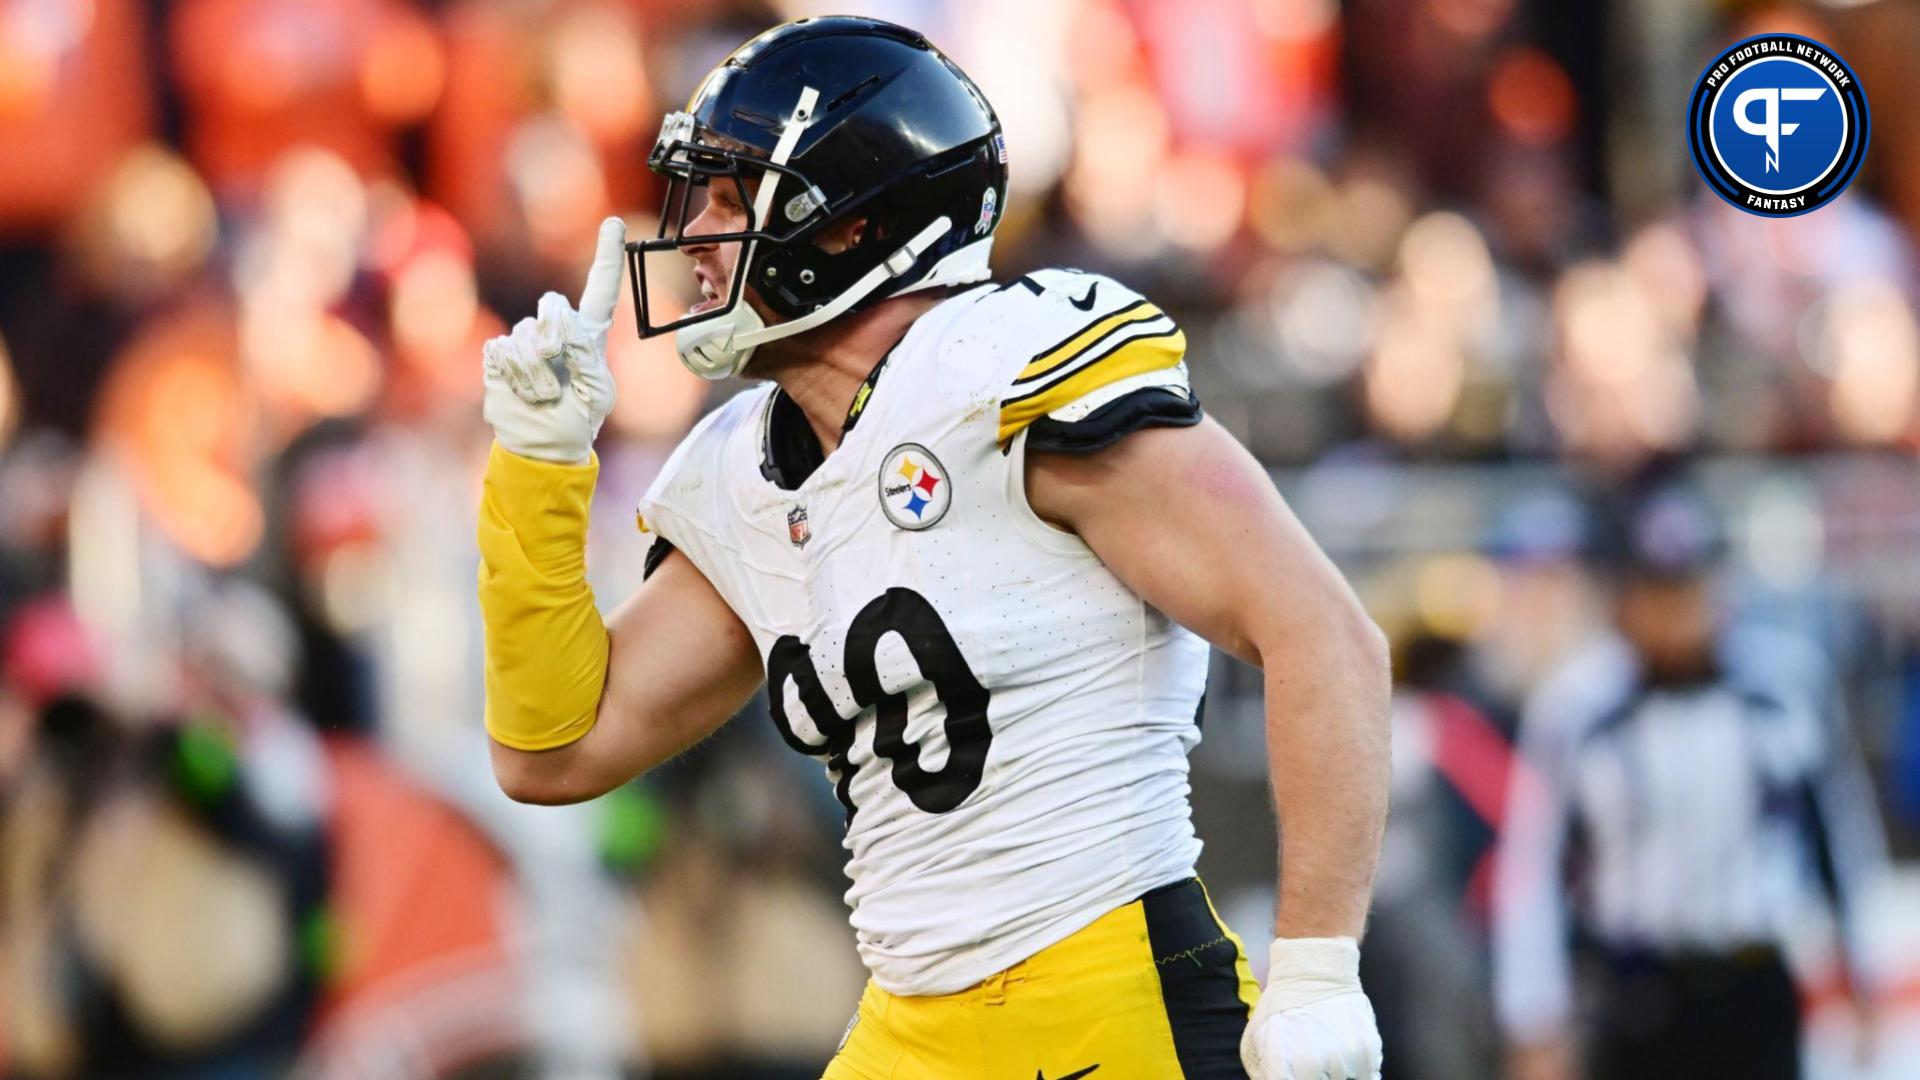 T.J. Watt (90) celebrates after a sack during the second half against the Cleveland Browns at Cleveland Browns Stadium.